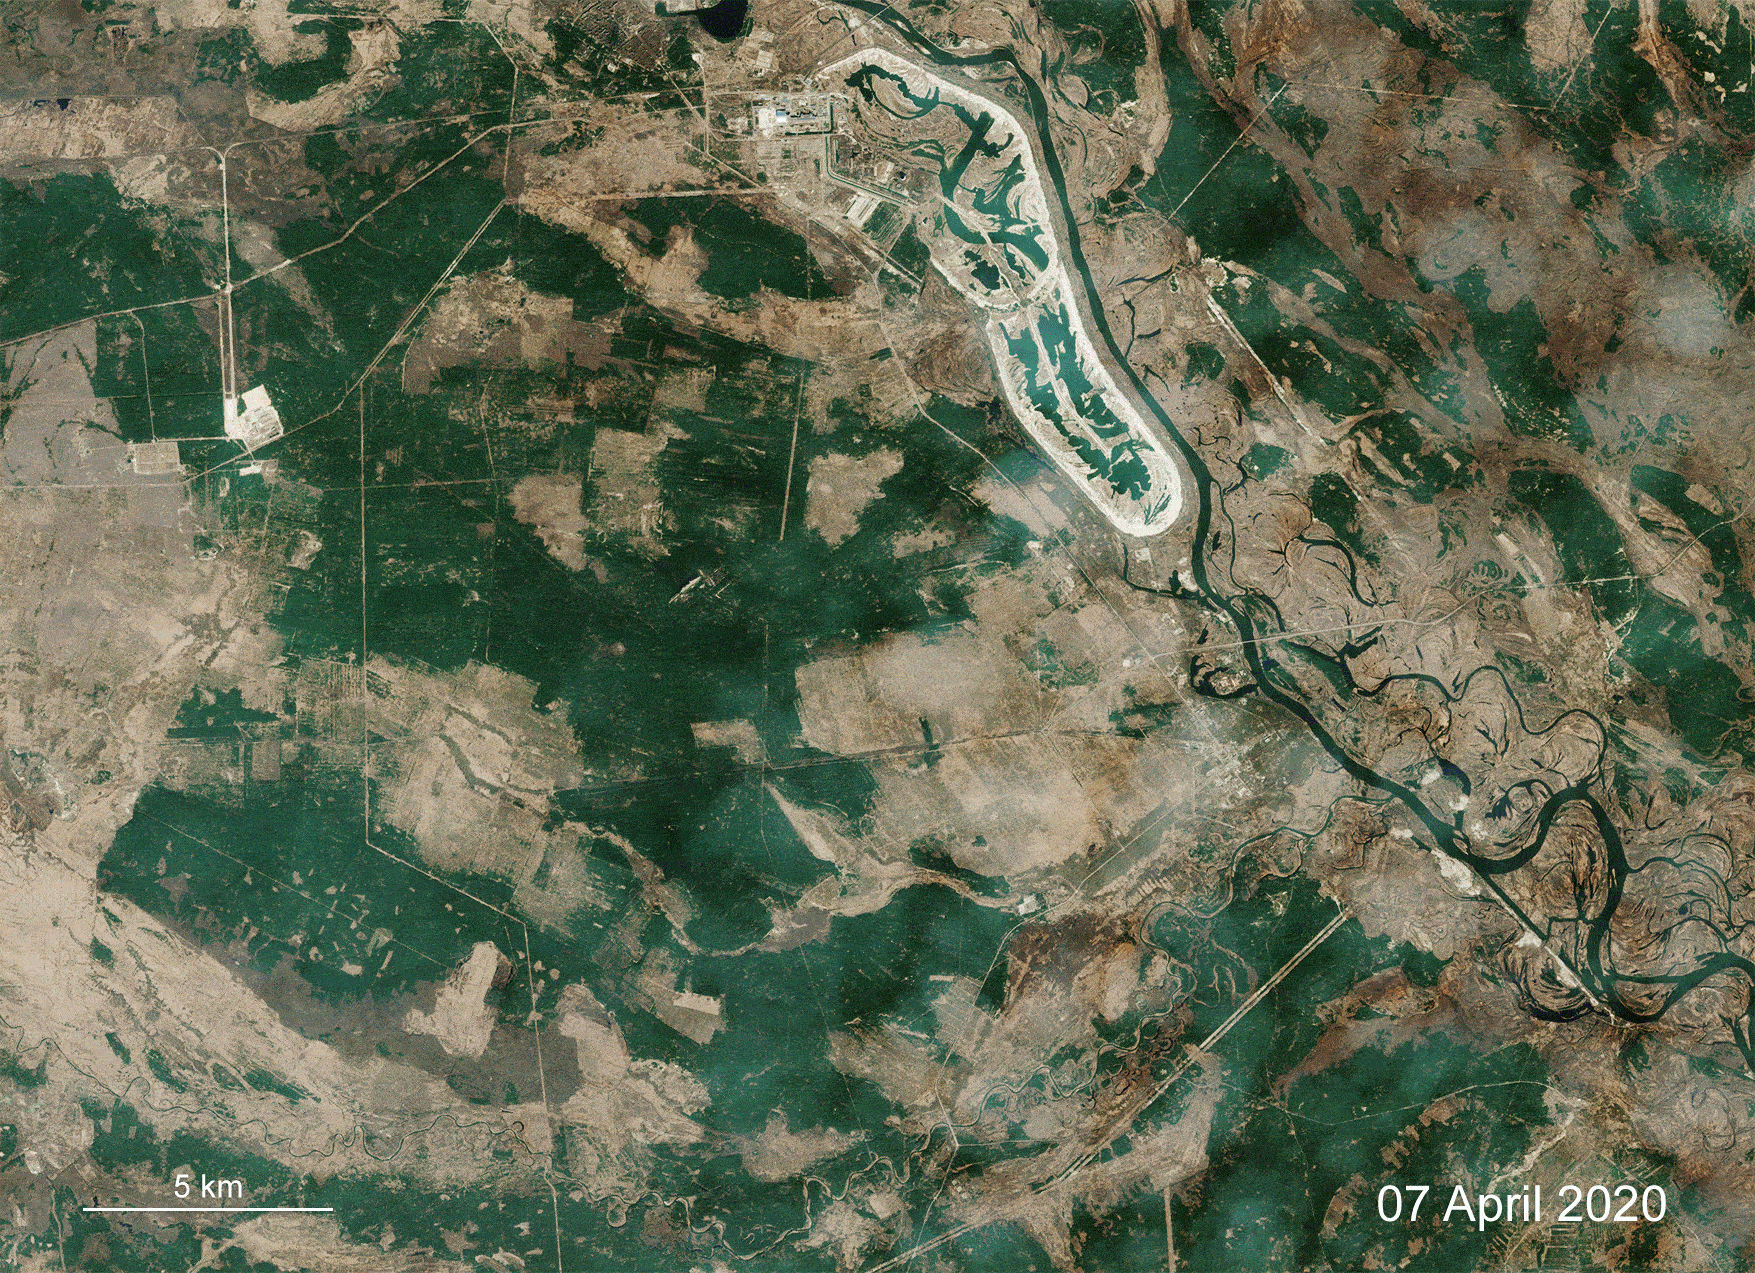 Figure 44: An outbreak of wildfires recently threatening the abandoned Chernobyl nuclear power plant in Ukraine. The animation above uses images from Copernicus Sentinel-2 to show the situation prior to the fires on 7 April, and then on 12 April. The image from 12 April is from one acquisition, but has been processed to show thermal anomalies, smoke from the fires and then the burned area through the smoke (image credit: ESA, the image contains Copernicus Sentinel data (2020), processed by ESA, CC BY-SA 3.0 IGO)